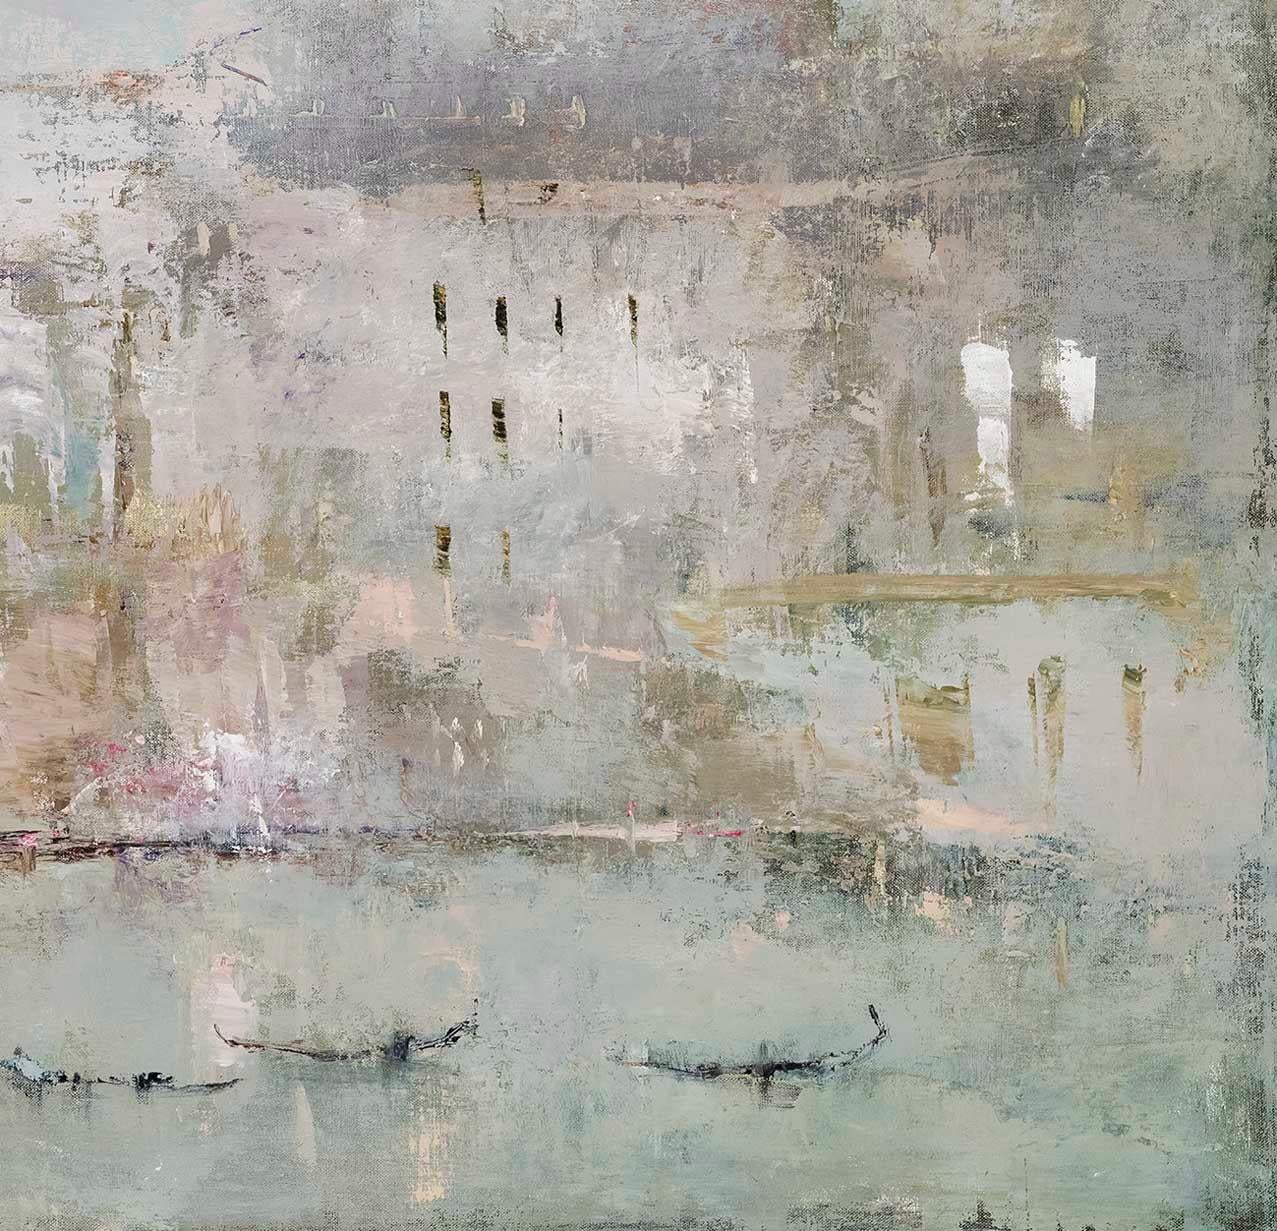 We Will Dip Our Hands to Feel What Can't Be Seen - Impressionist Painting by France Jodoin